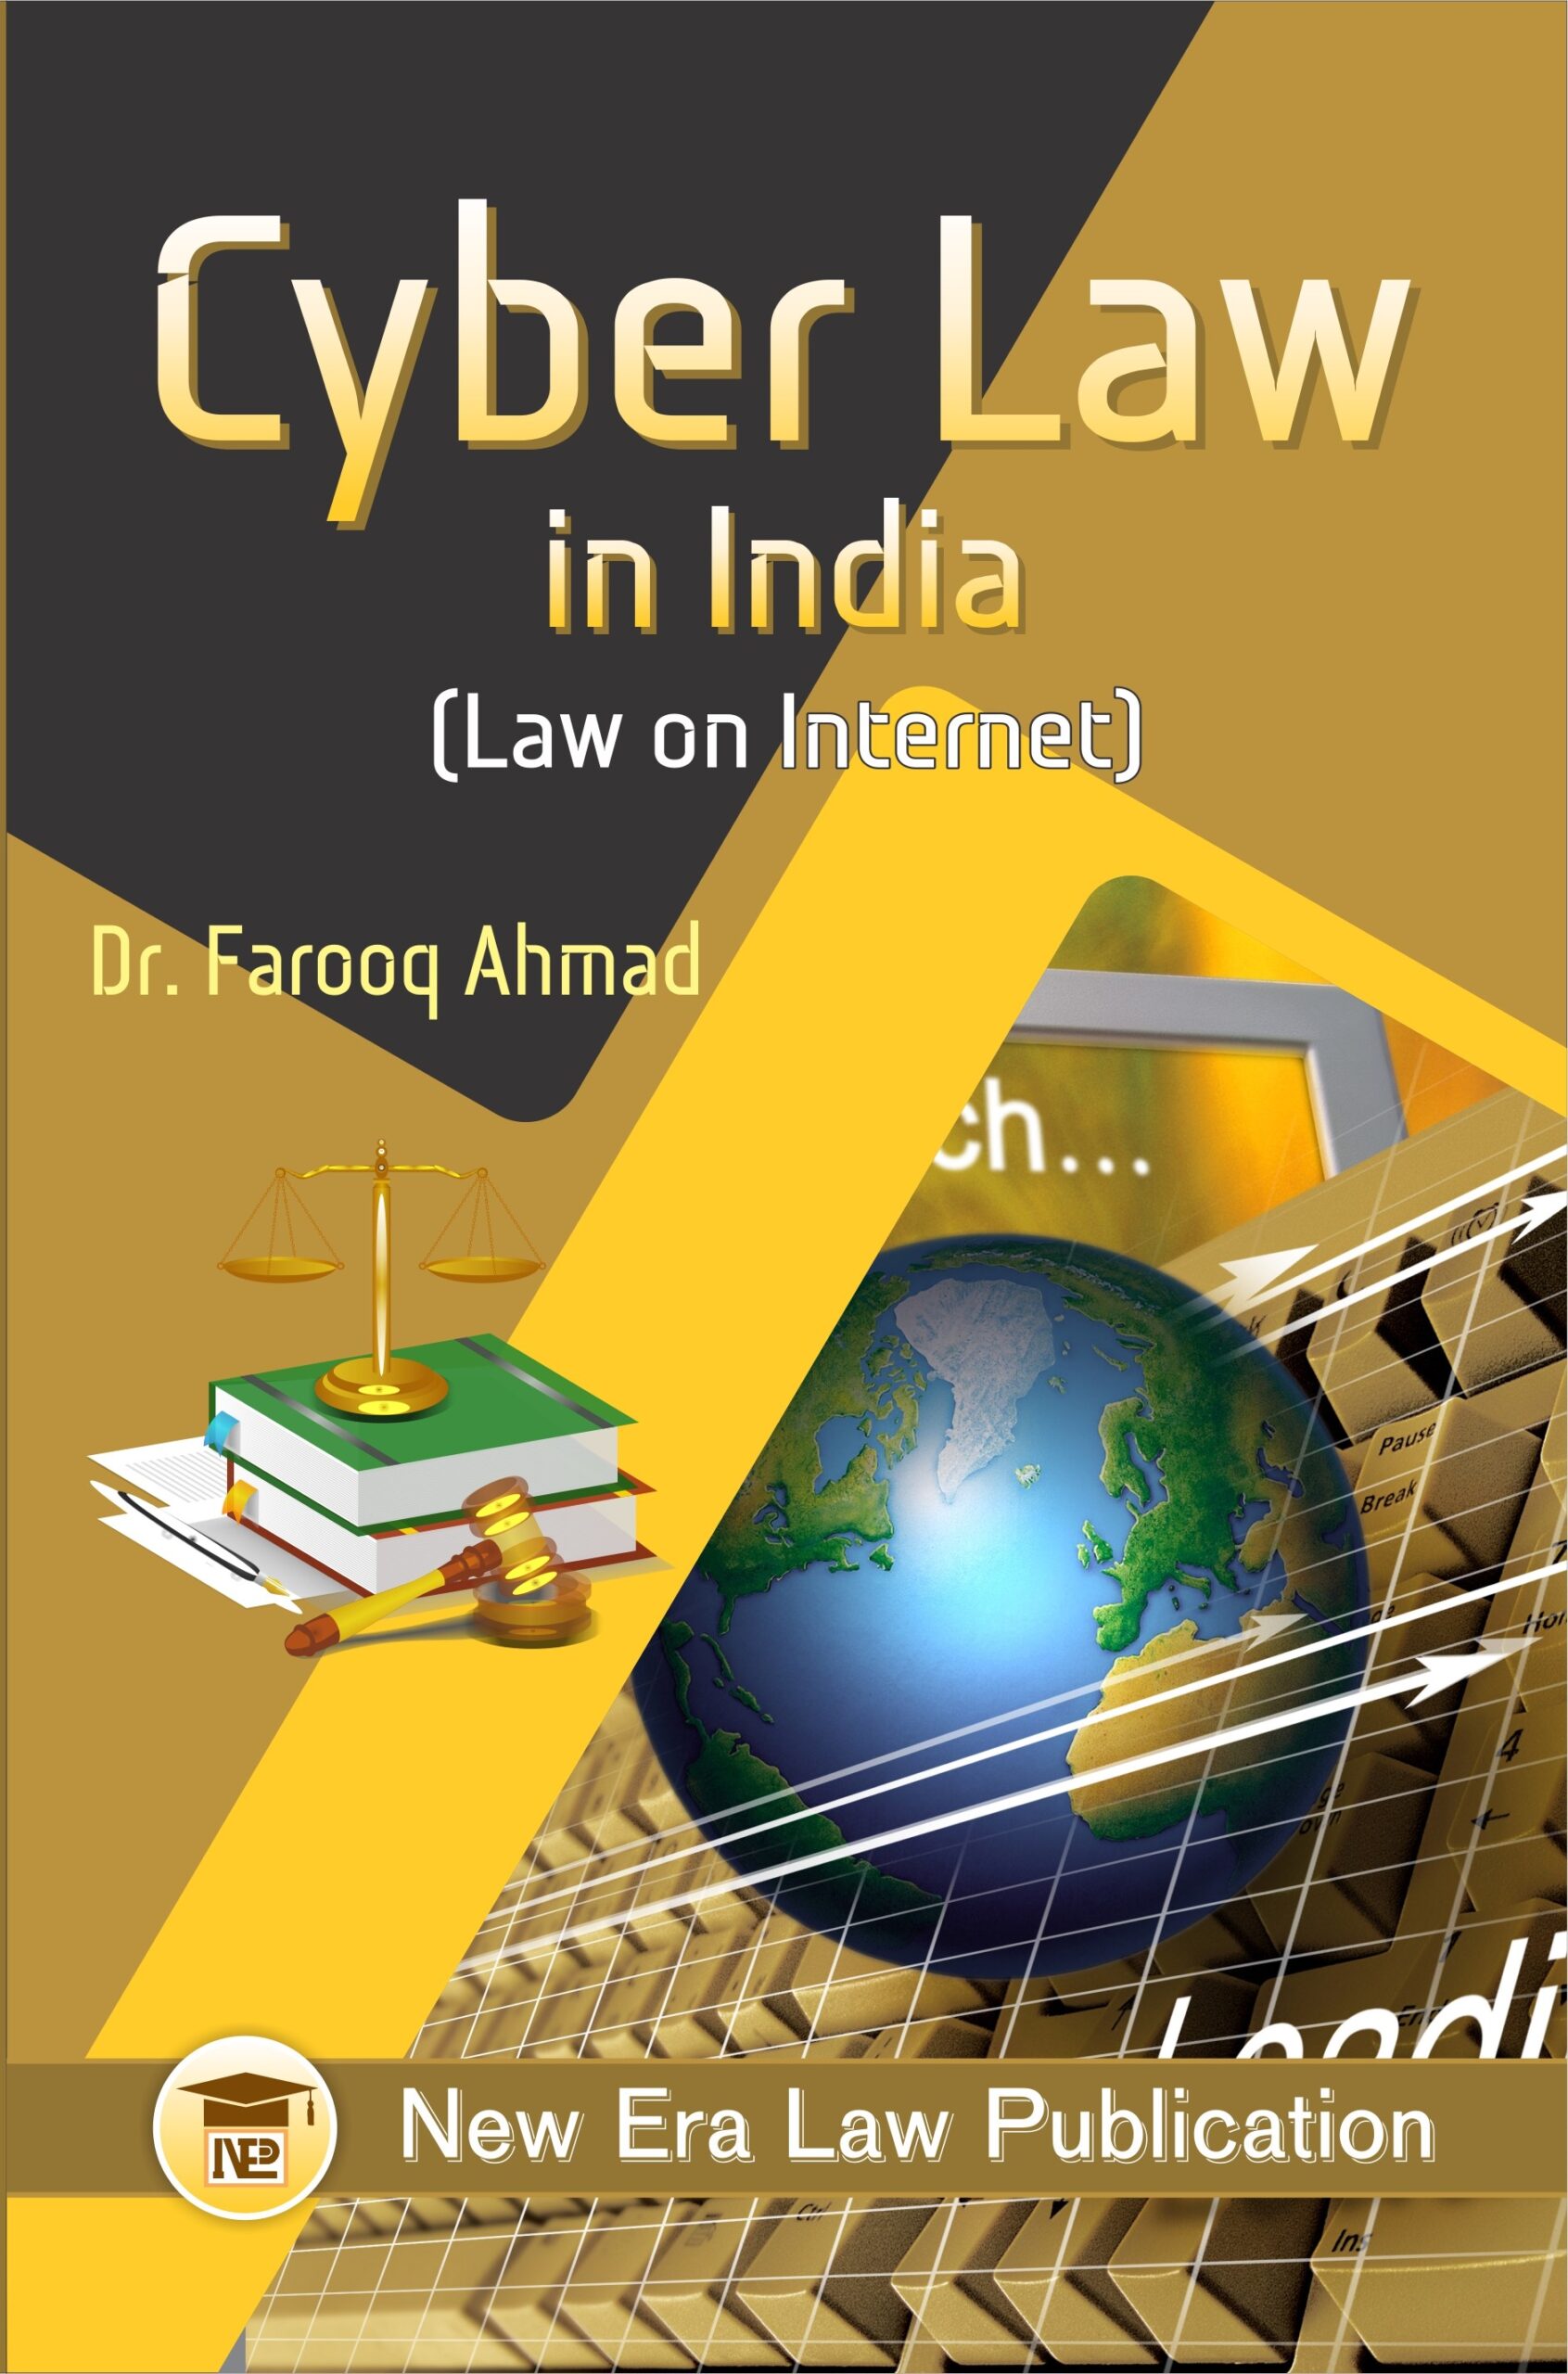 cyber law topics for research in india